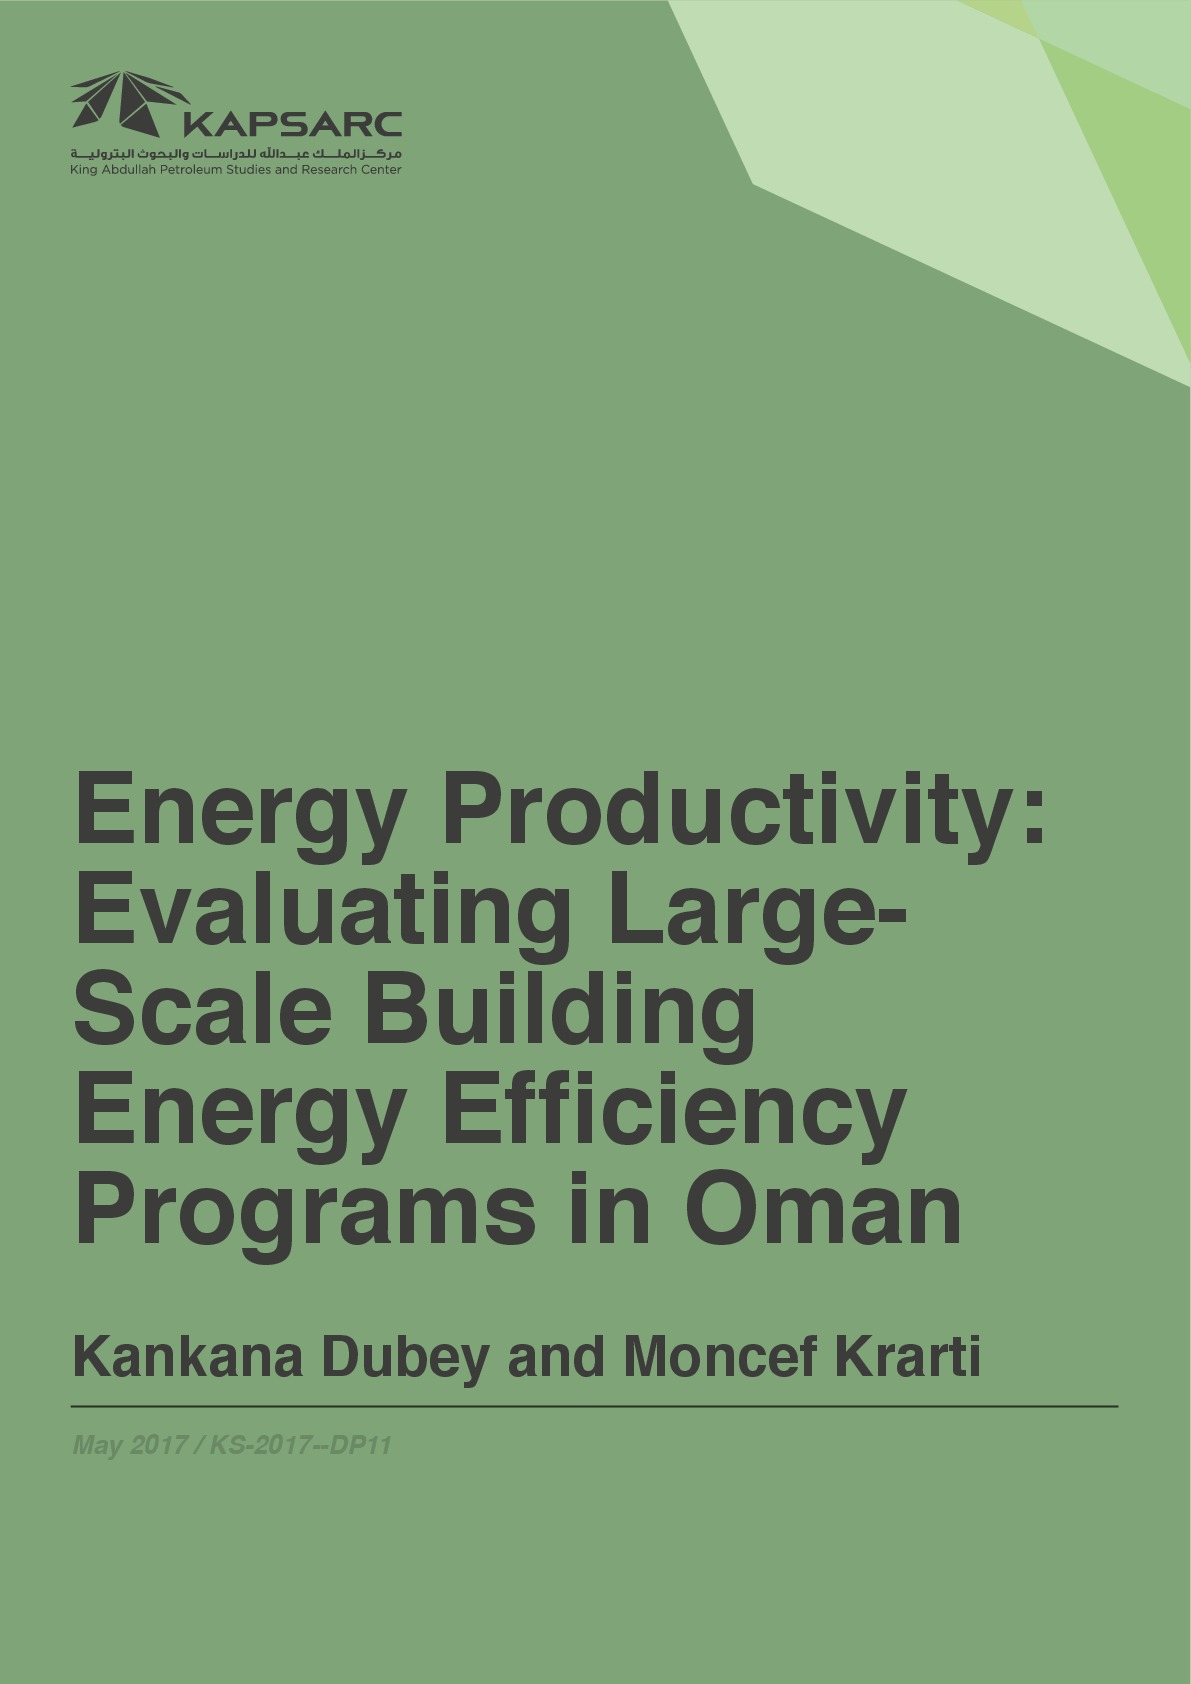 Energy Productivity: Evaluating Large-Scale Building Energy Efficiency Programs in Oman